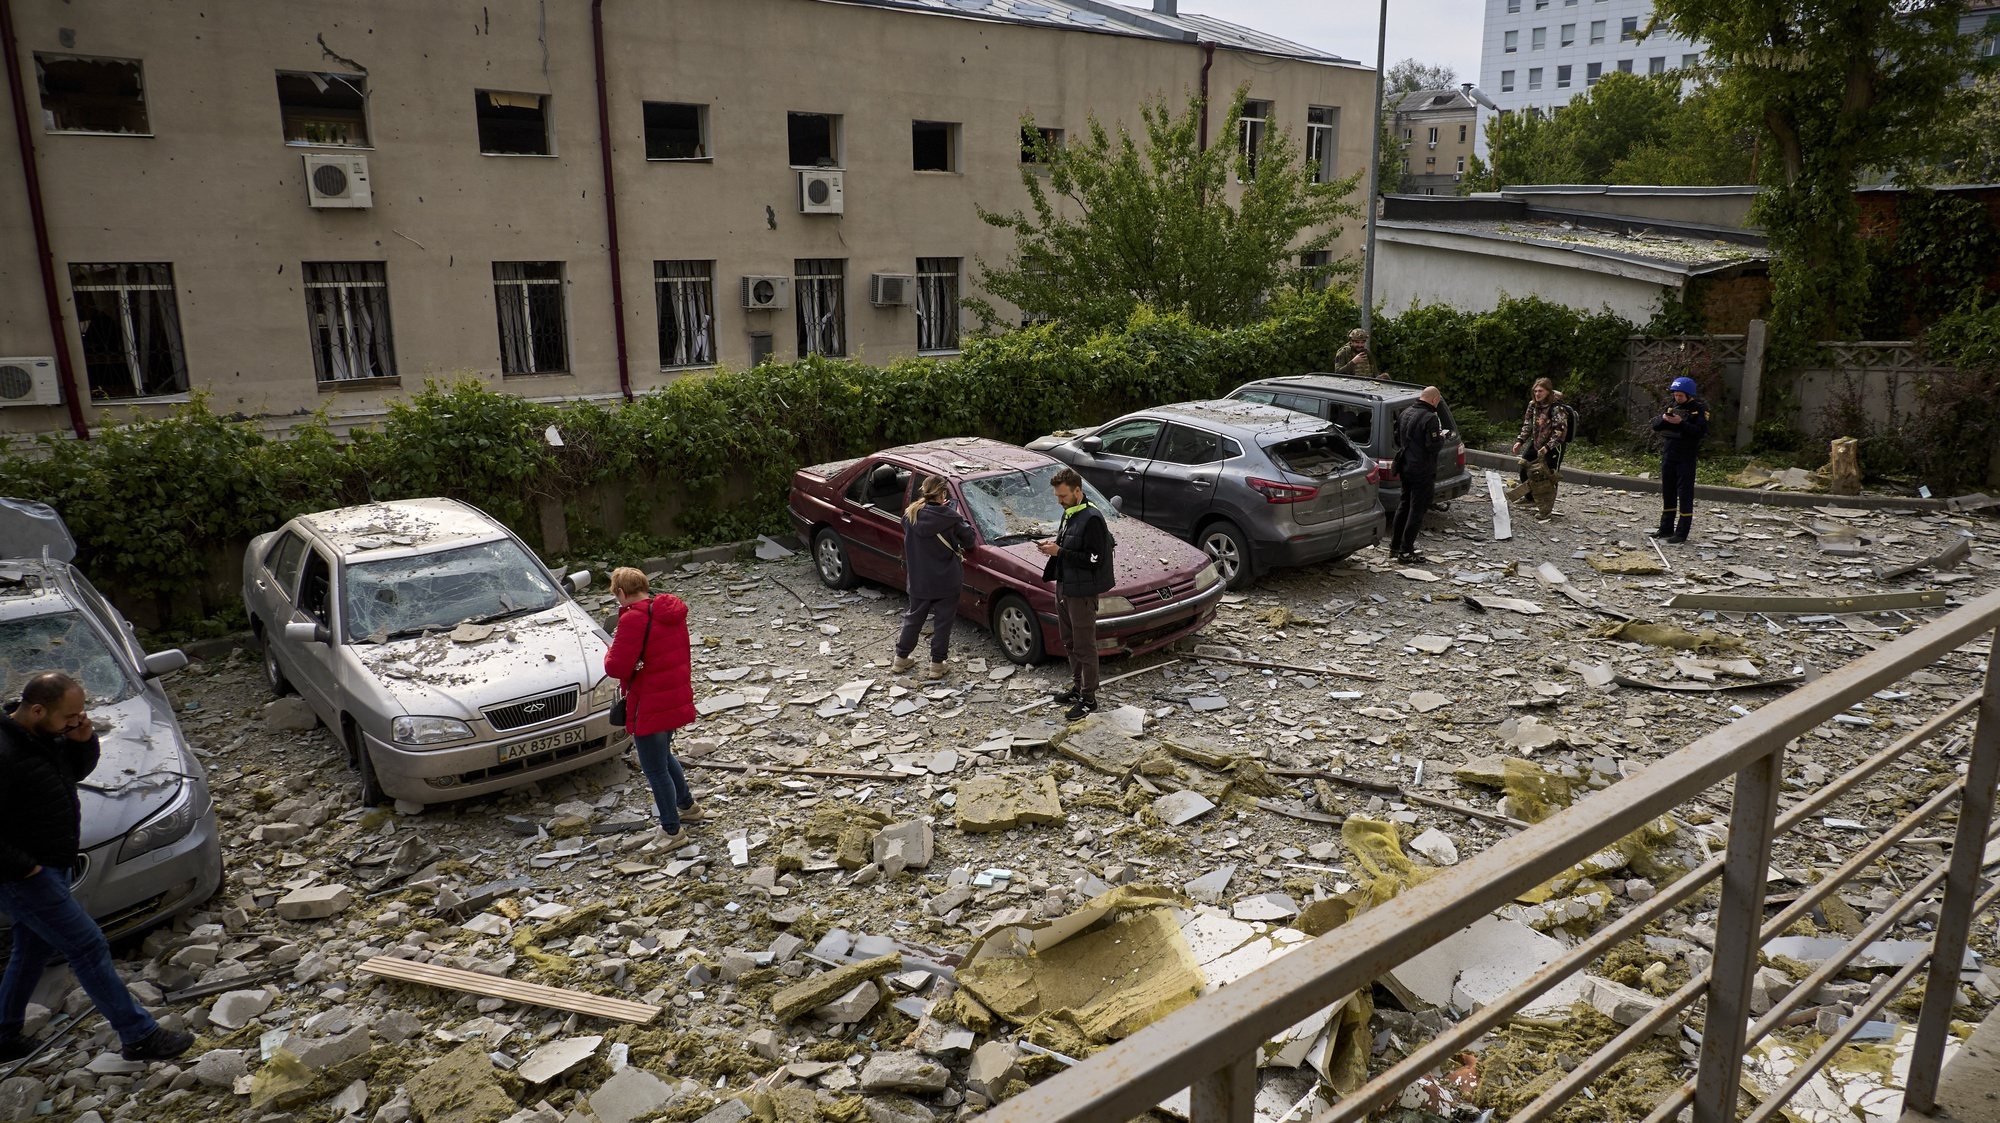 epa11340667 People inspect their cars parked near the site of a shelling in a residential area in Kharkiv, Ukraine, 14 May 2024 amid the Russian invasion.  More than 1000 windows were broken and at least 21 people were wounded including three children in the rocket and glide bomb attacks, according to the mayor of Kharkiv Igor Terekhov. Russian troops entered Ukrainian territory on 24 February 2022, starting a conflict that has provoked destruction and a humanitarian crisis.  EPA/SERGEY KOZLOV 52508